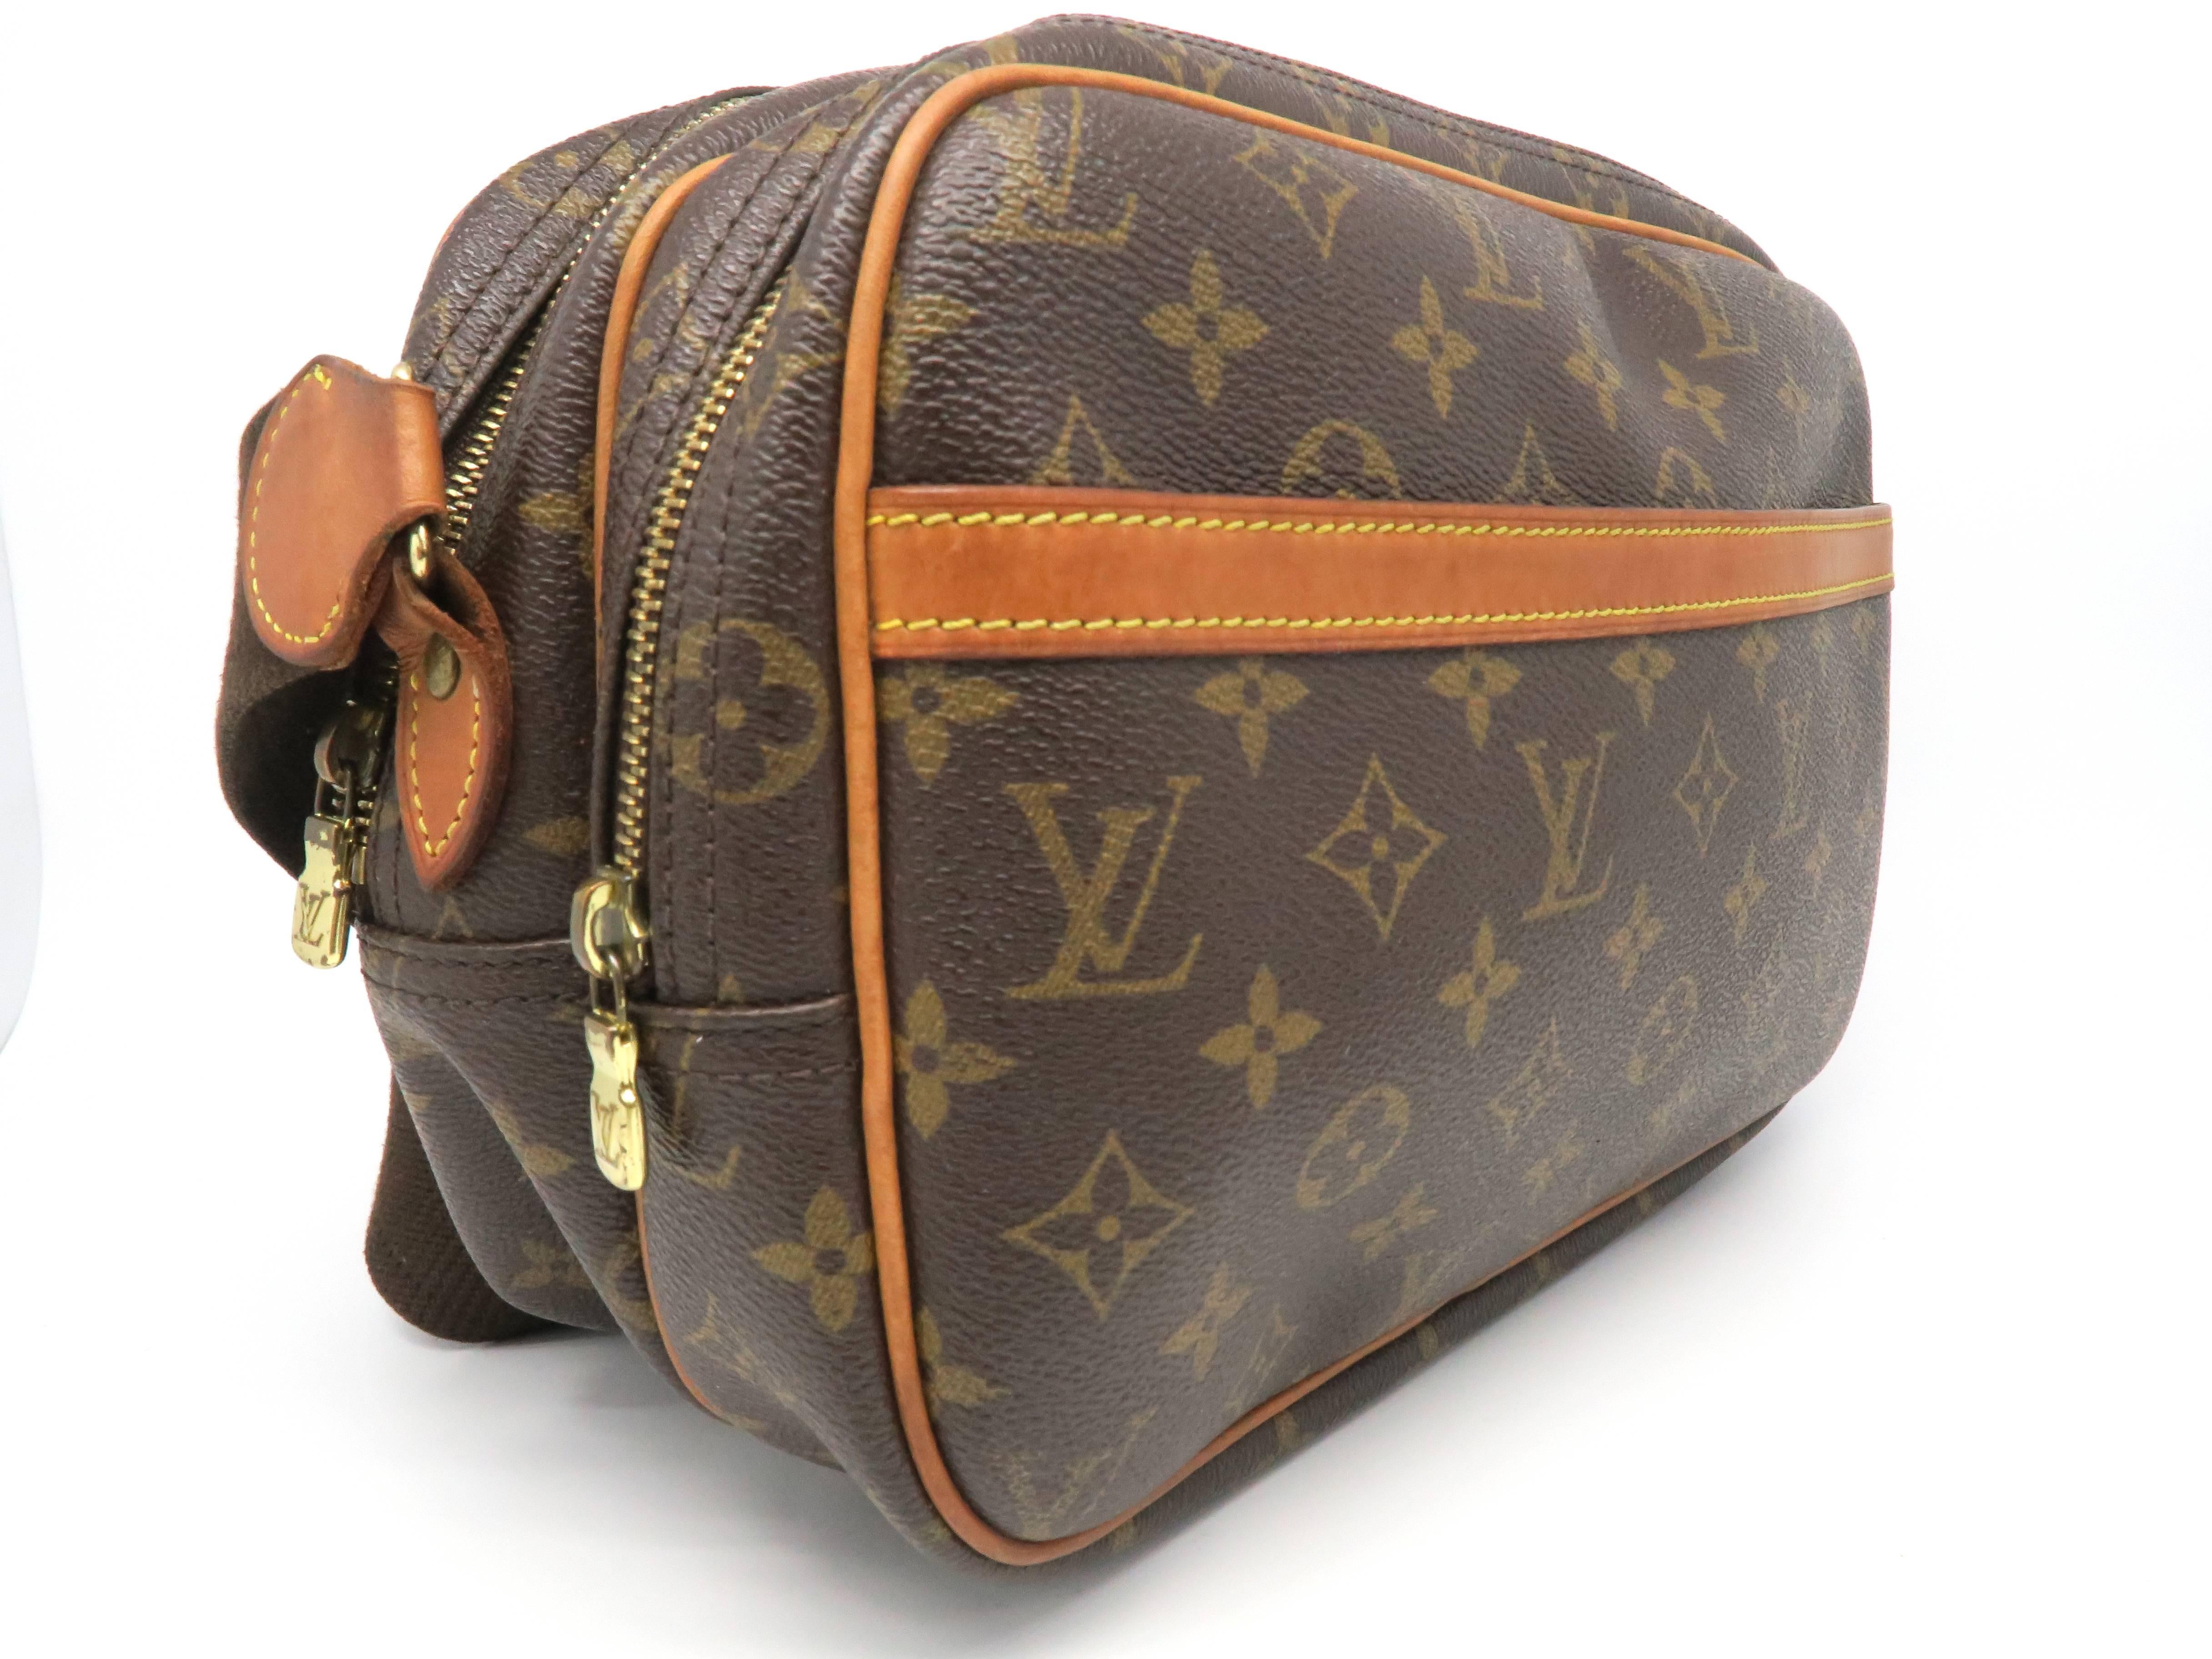 Color: Brown

Material: Monogram Canvas

Condition: Rank C
Overall: Poor, serious defects 
Surface: Minor Scratches and Stains
Corners: Obvious Stains
Edges: Obvious Stains
Handles/Straps: Minor Scratches and Stains
Hardware: Minor Scratches
Inside: